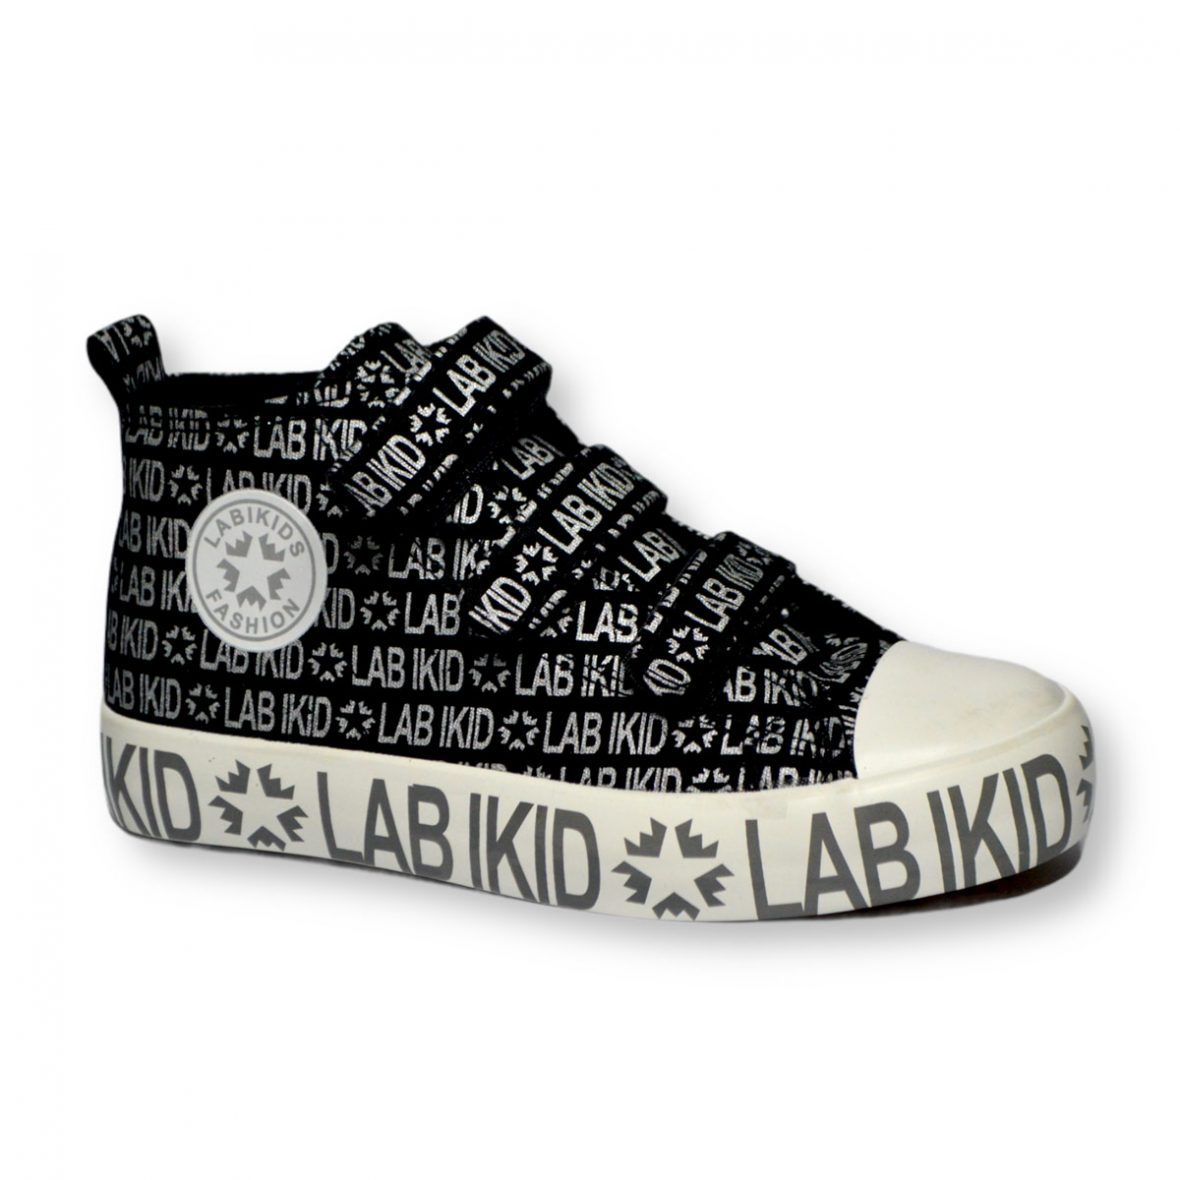 Lab iKid Unisex Black and White Soft Velcro Canvas Shoes for Kids